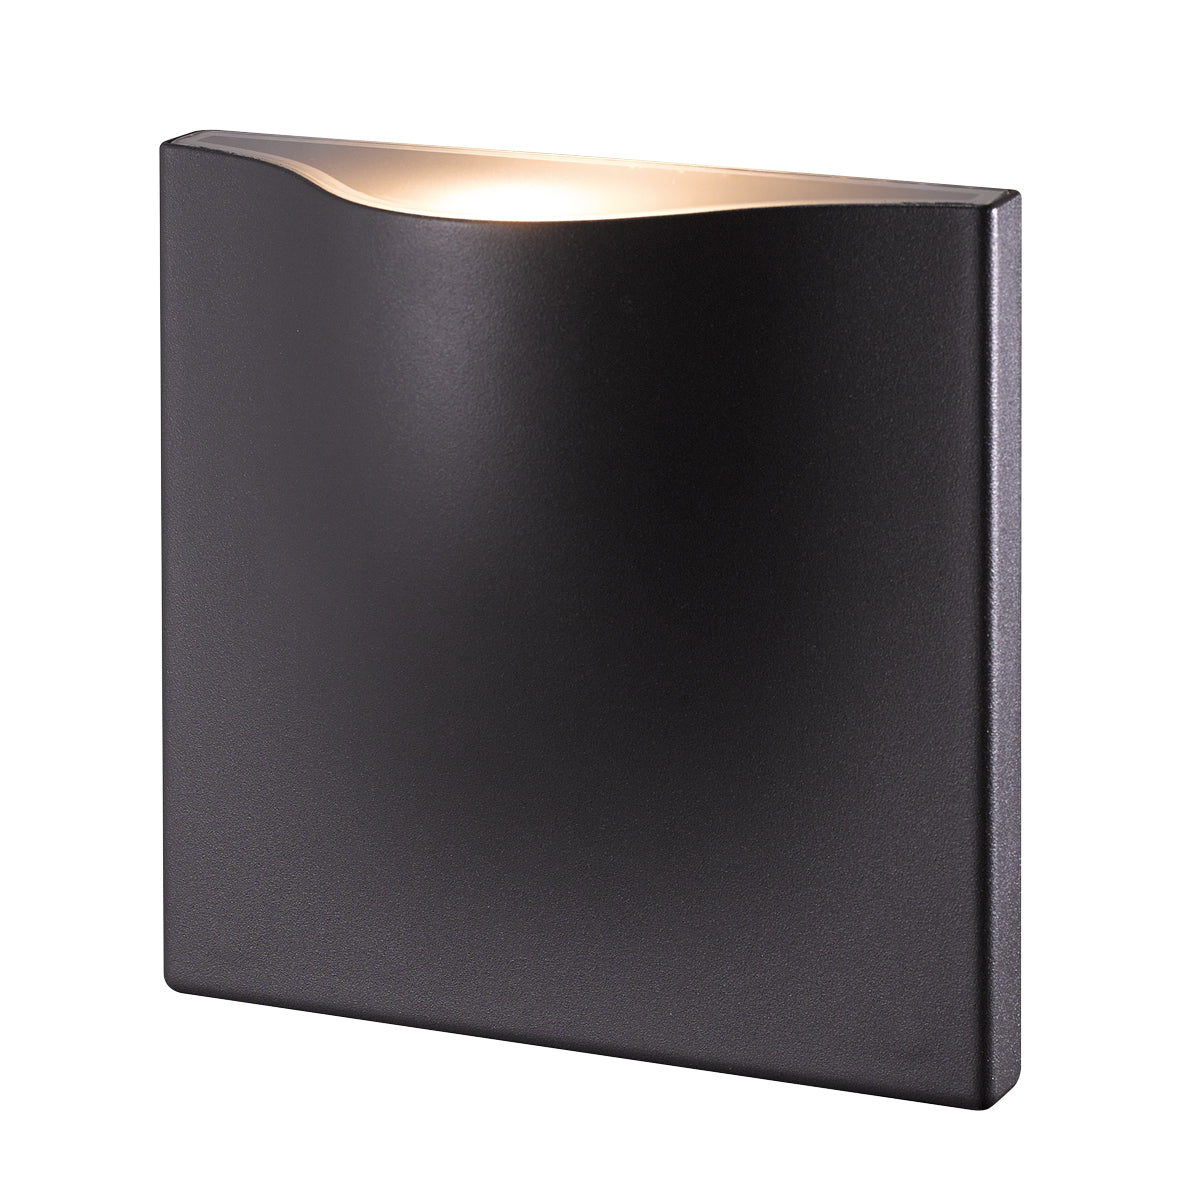 HAVEN Outdoor sconce Aluminum - 28277-026 INTEGRATED LED | EUROFASE